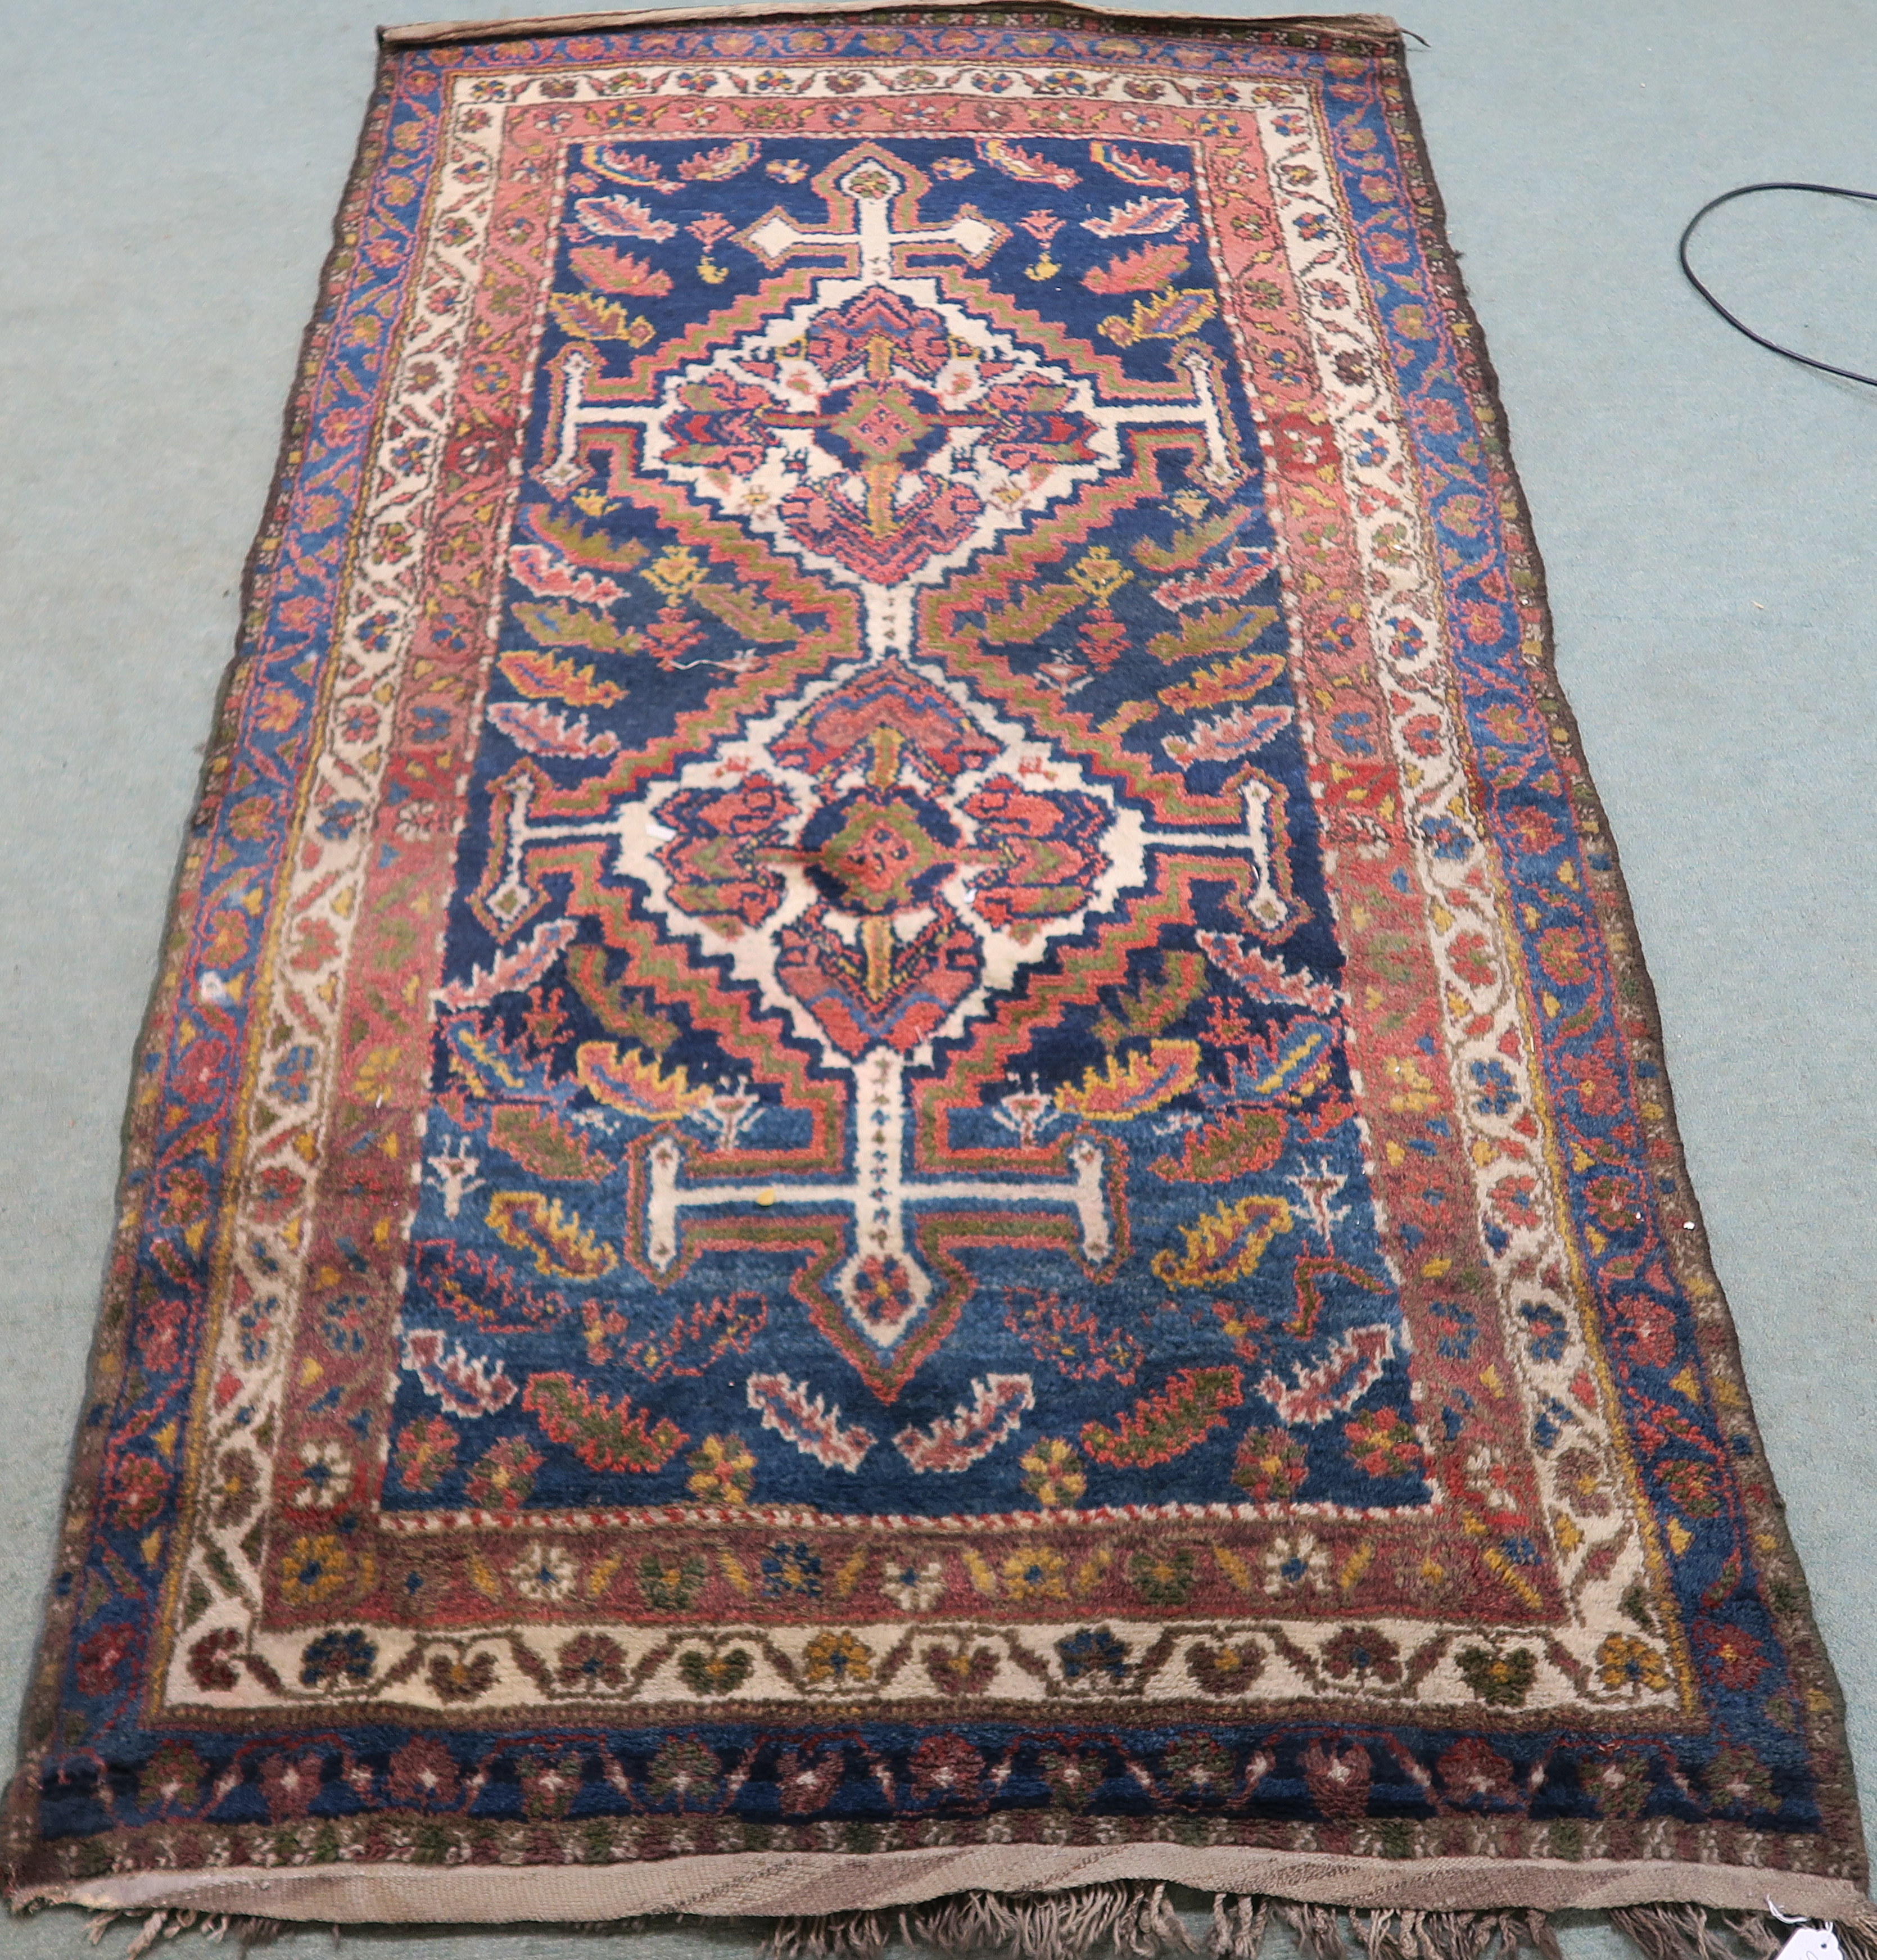 A blue ground Eastern rug with stylised birds and animals with two central medallions, 225cm x 123cm